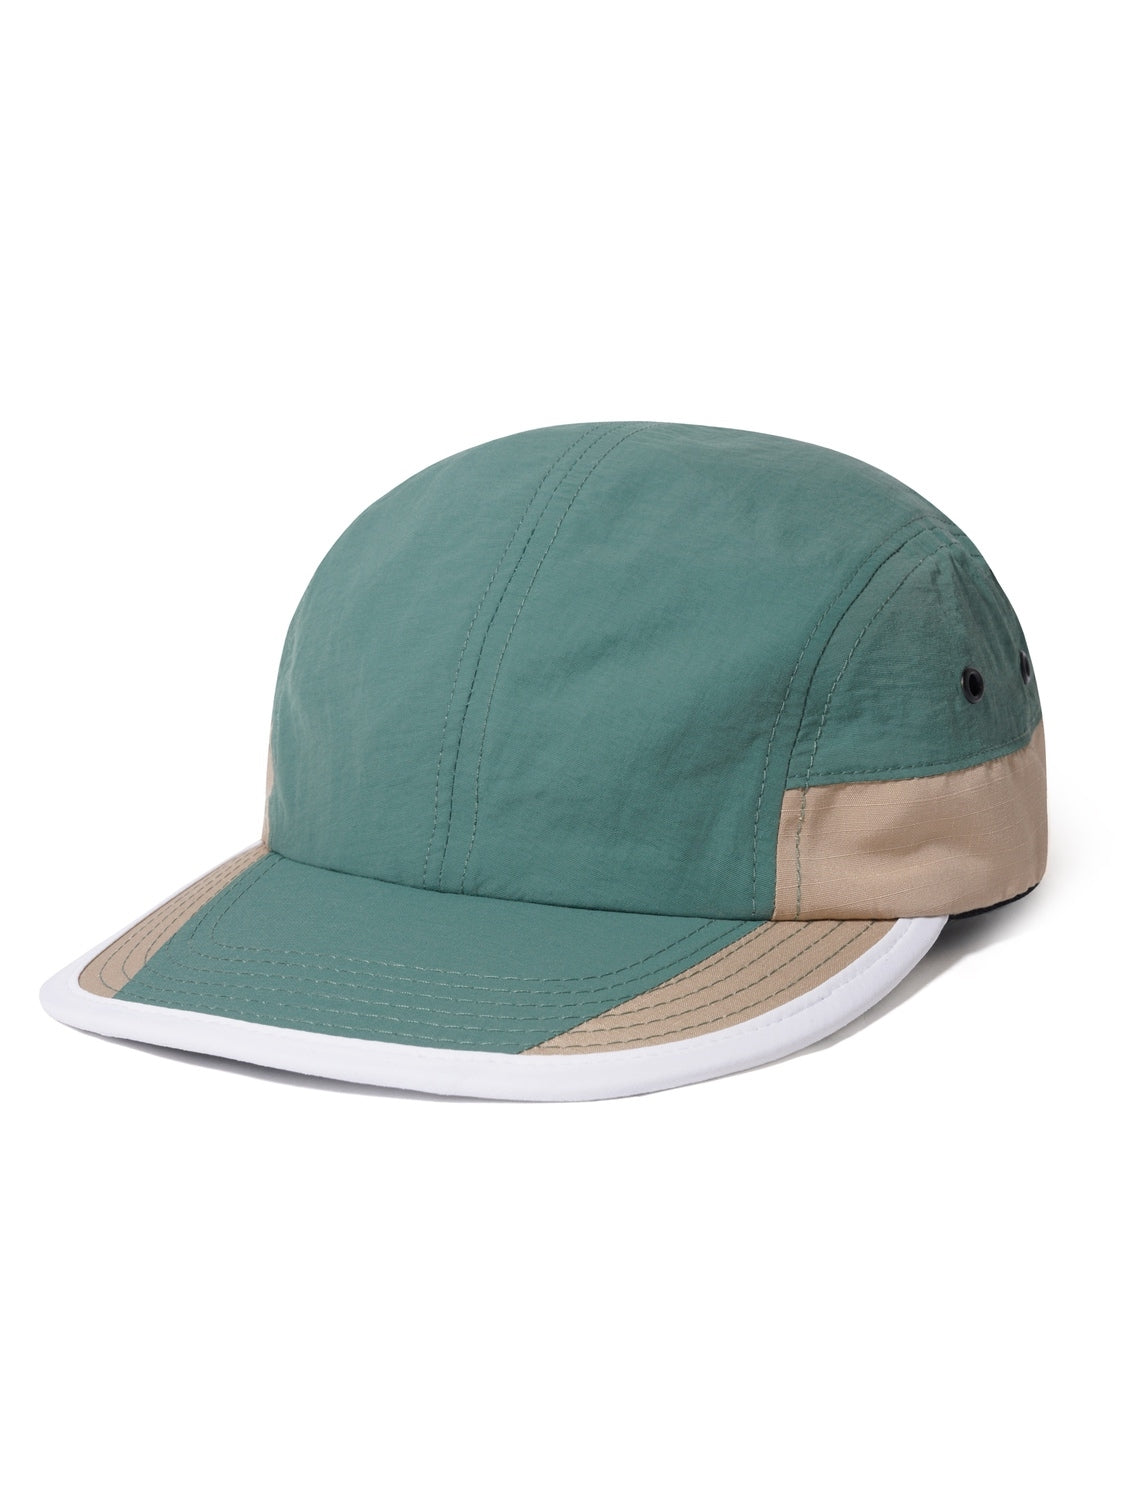 BUTTER GOODS Ripstop Trail 5 Panel Cap - Sand/Forest